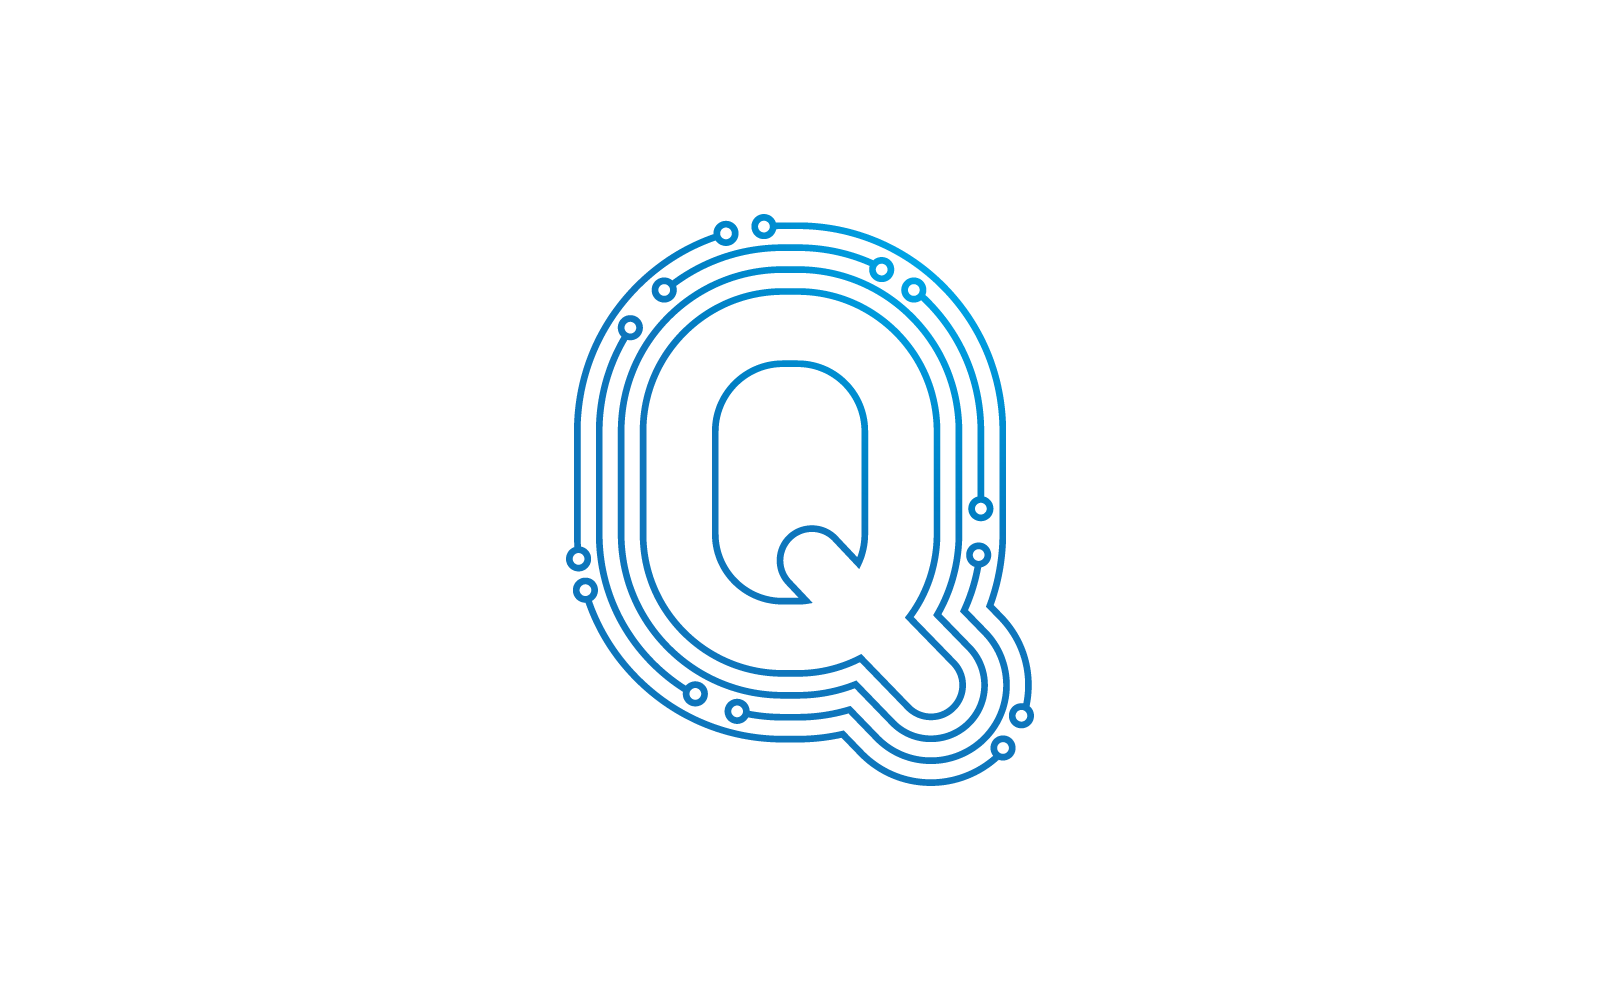 Q initial letter Circuit technology illustration logo template